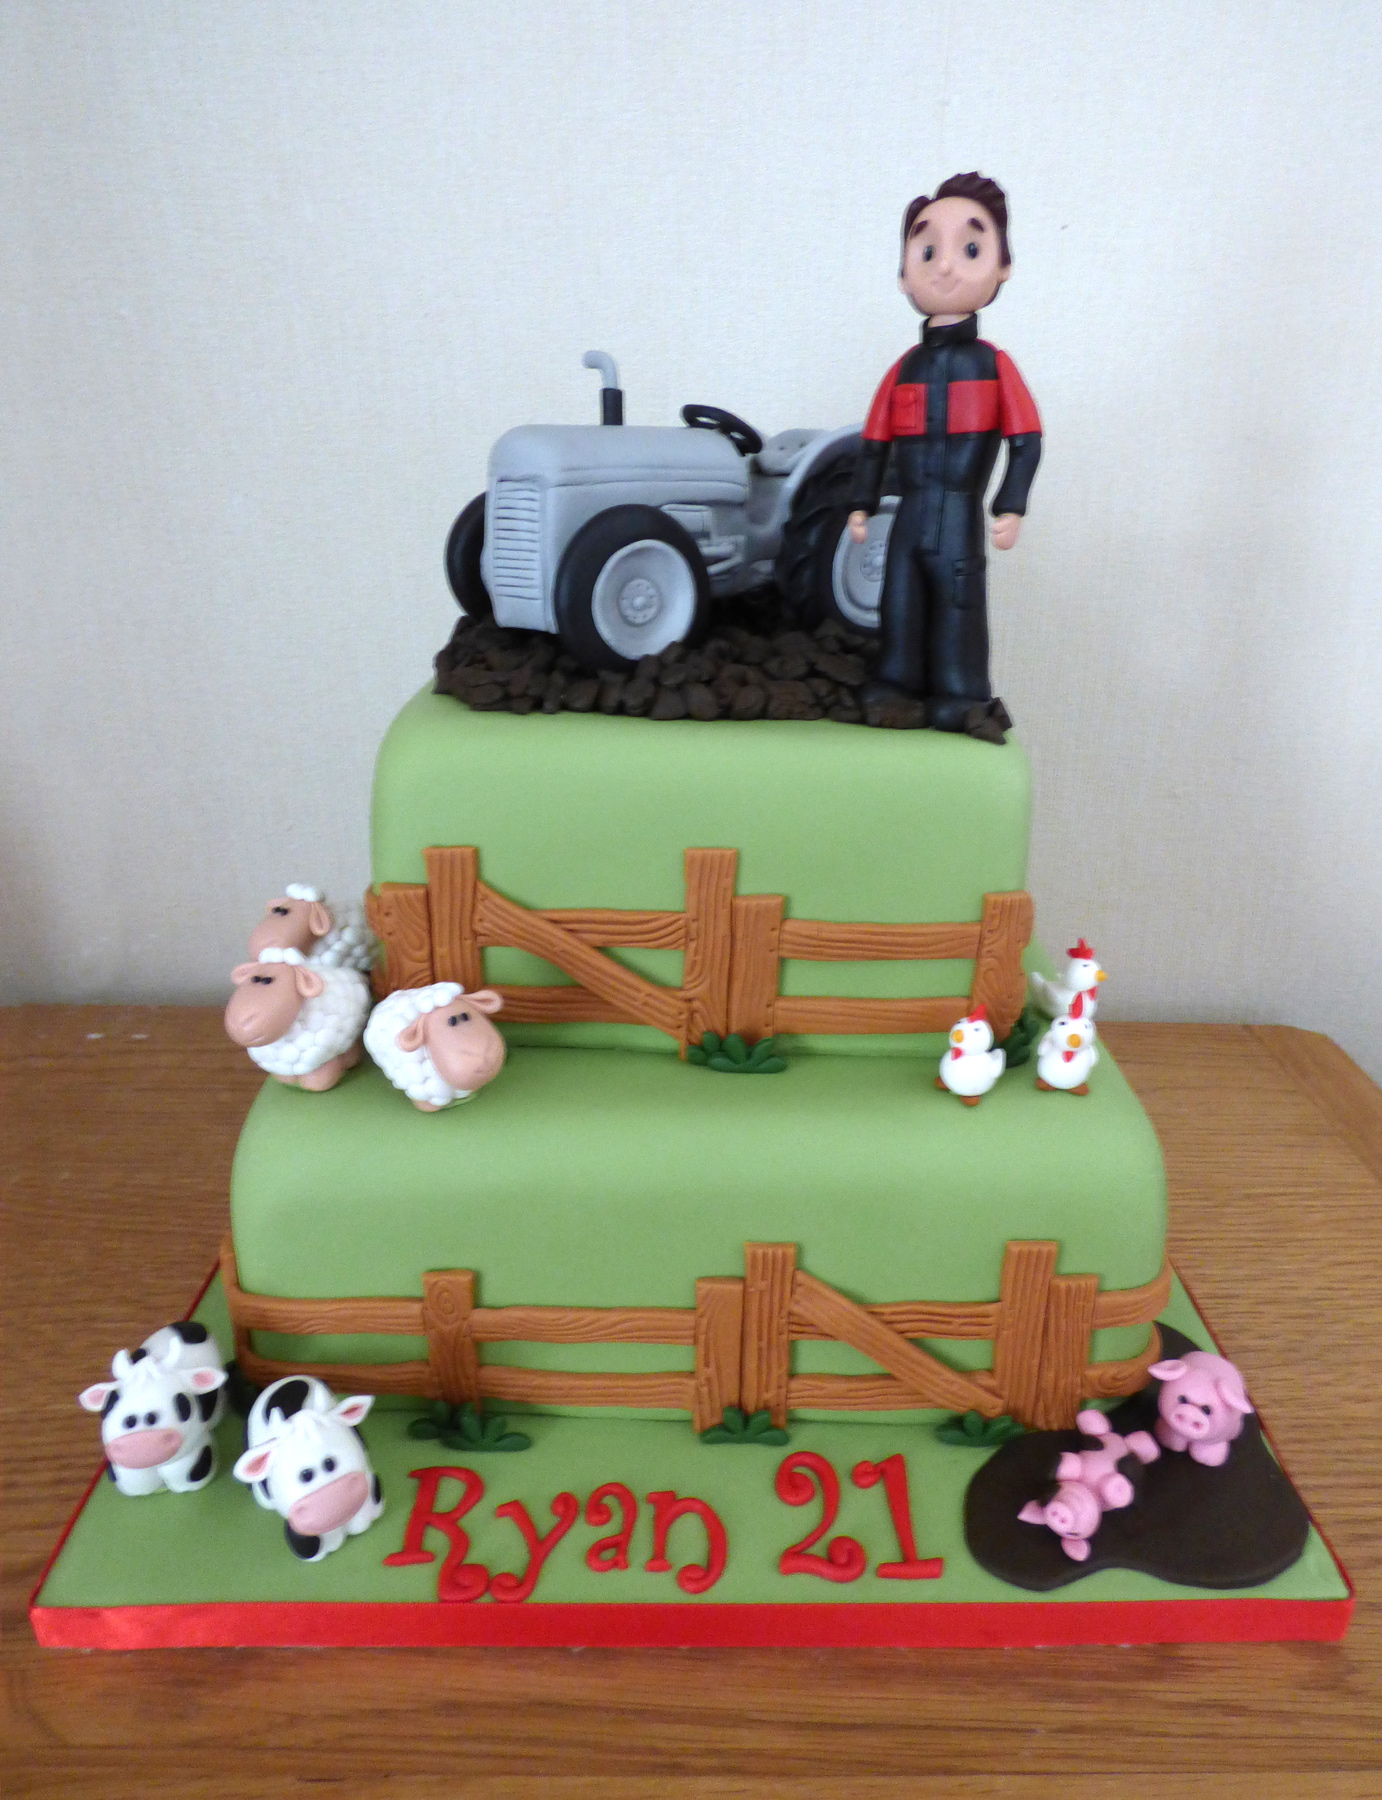 John Deer Tractor - Decorated Cake by joanne - CakesDecor